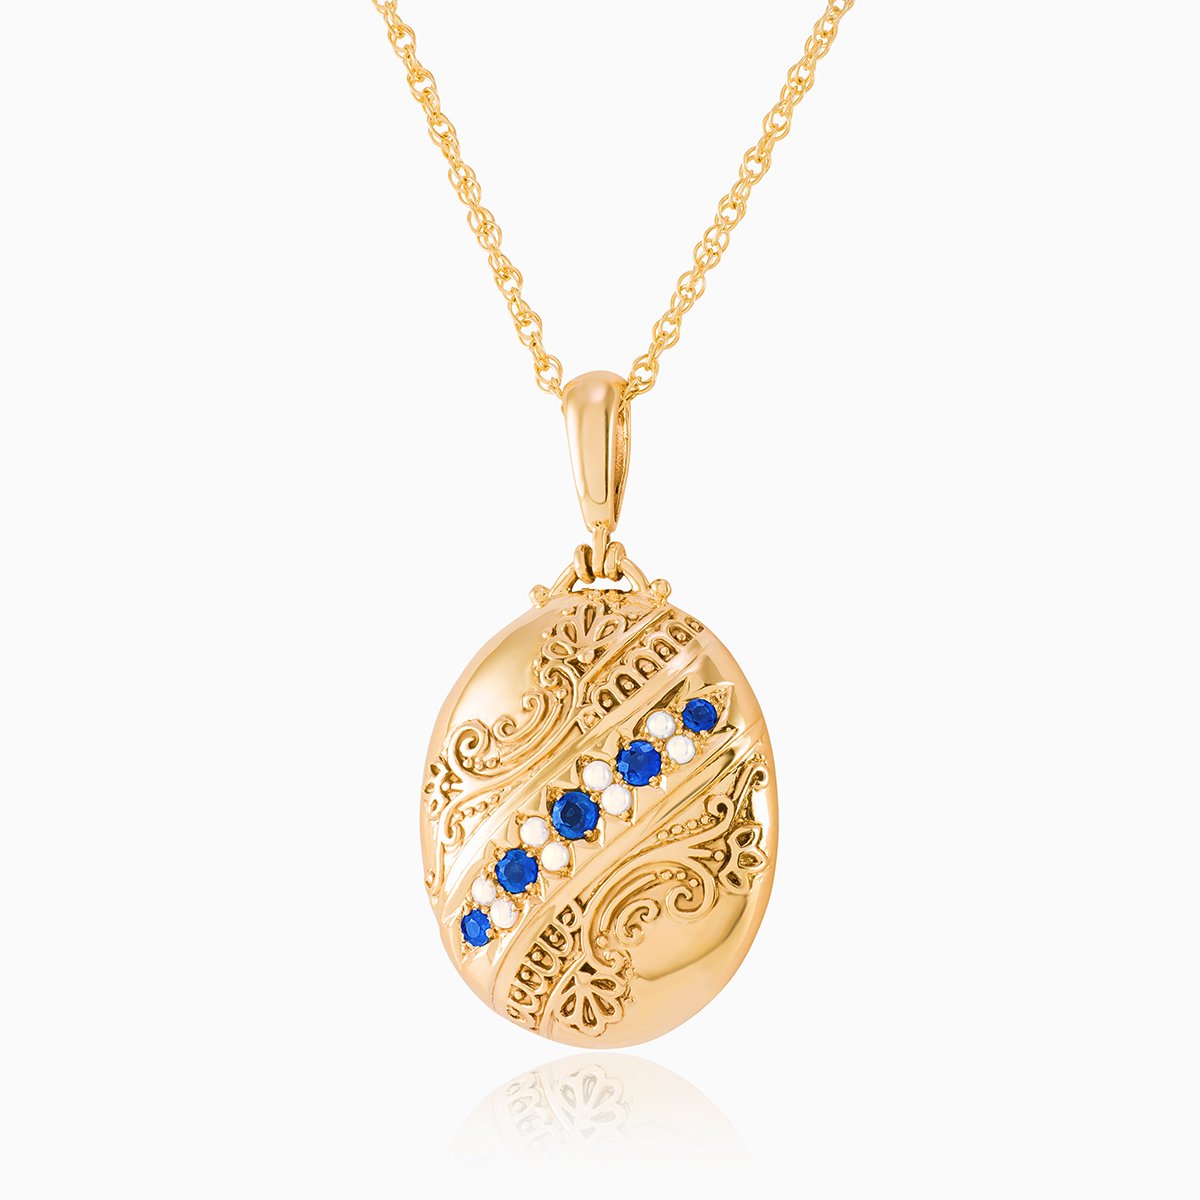 Product title: Large Sapphire Victorian Style Locket, product type: Locket